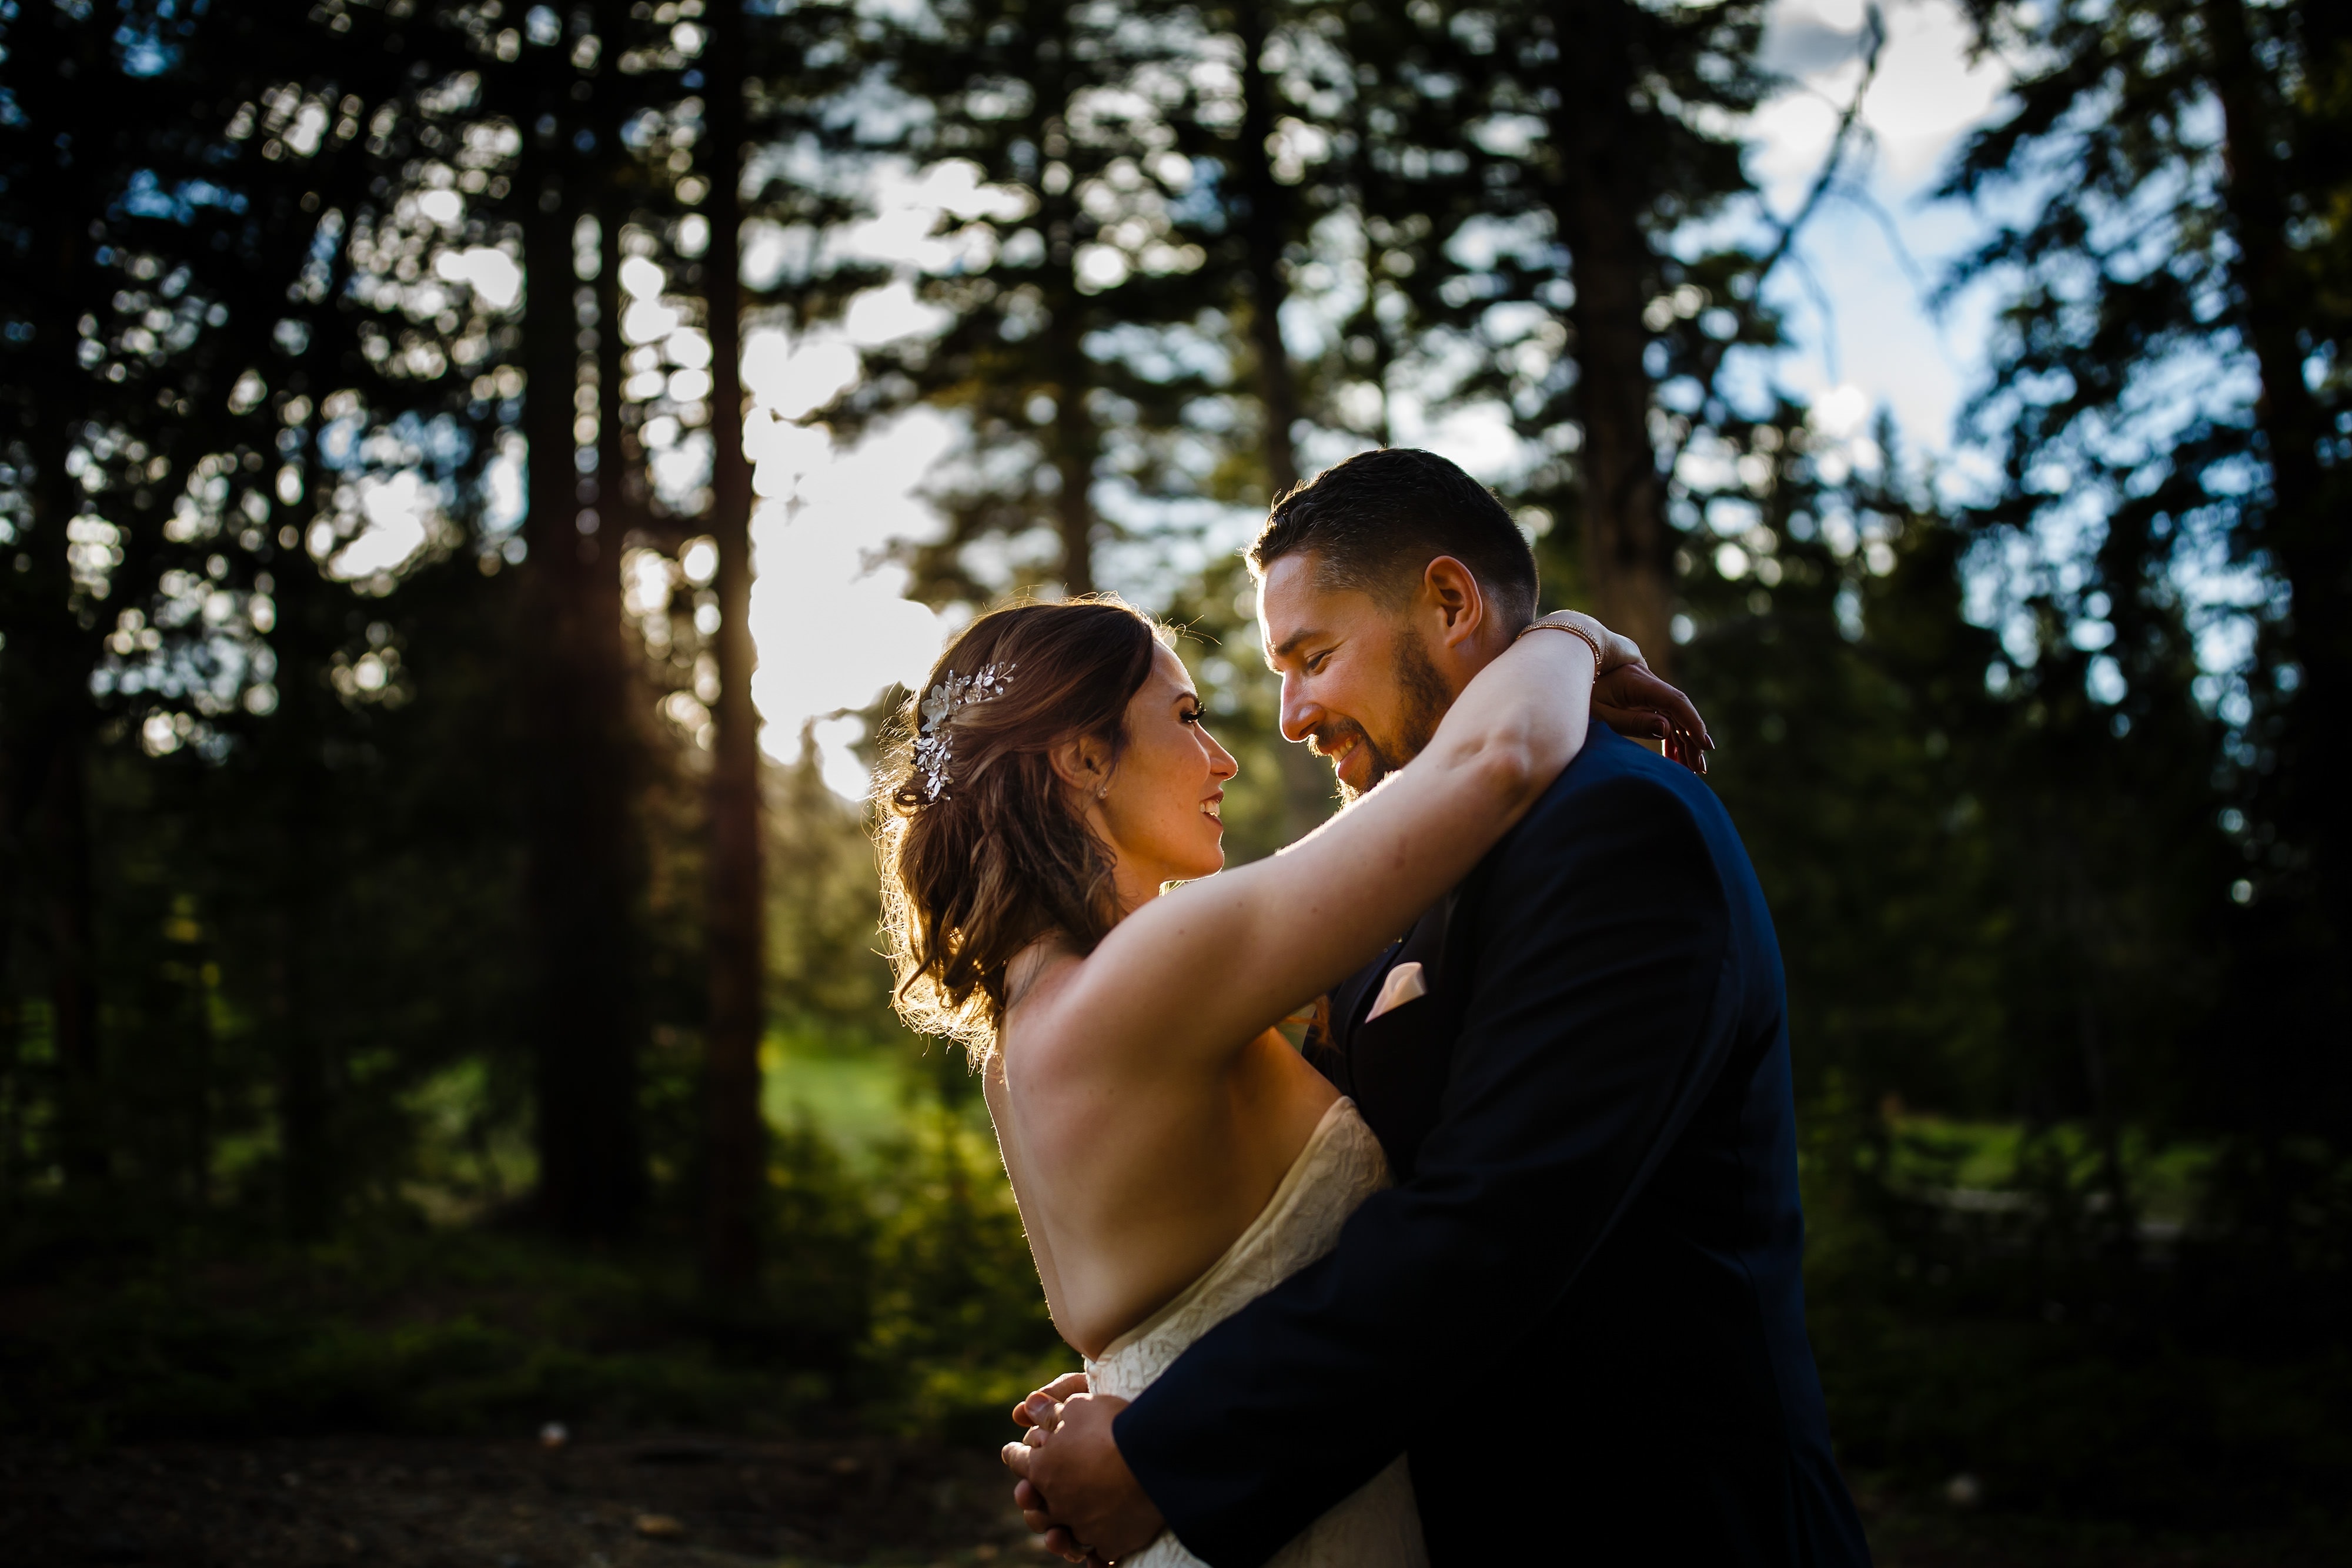 Sharon and Nick embrace in the evening light during their wedding at TenMile Station on Peak 9 in Breckenridge